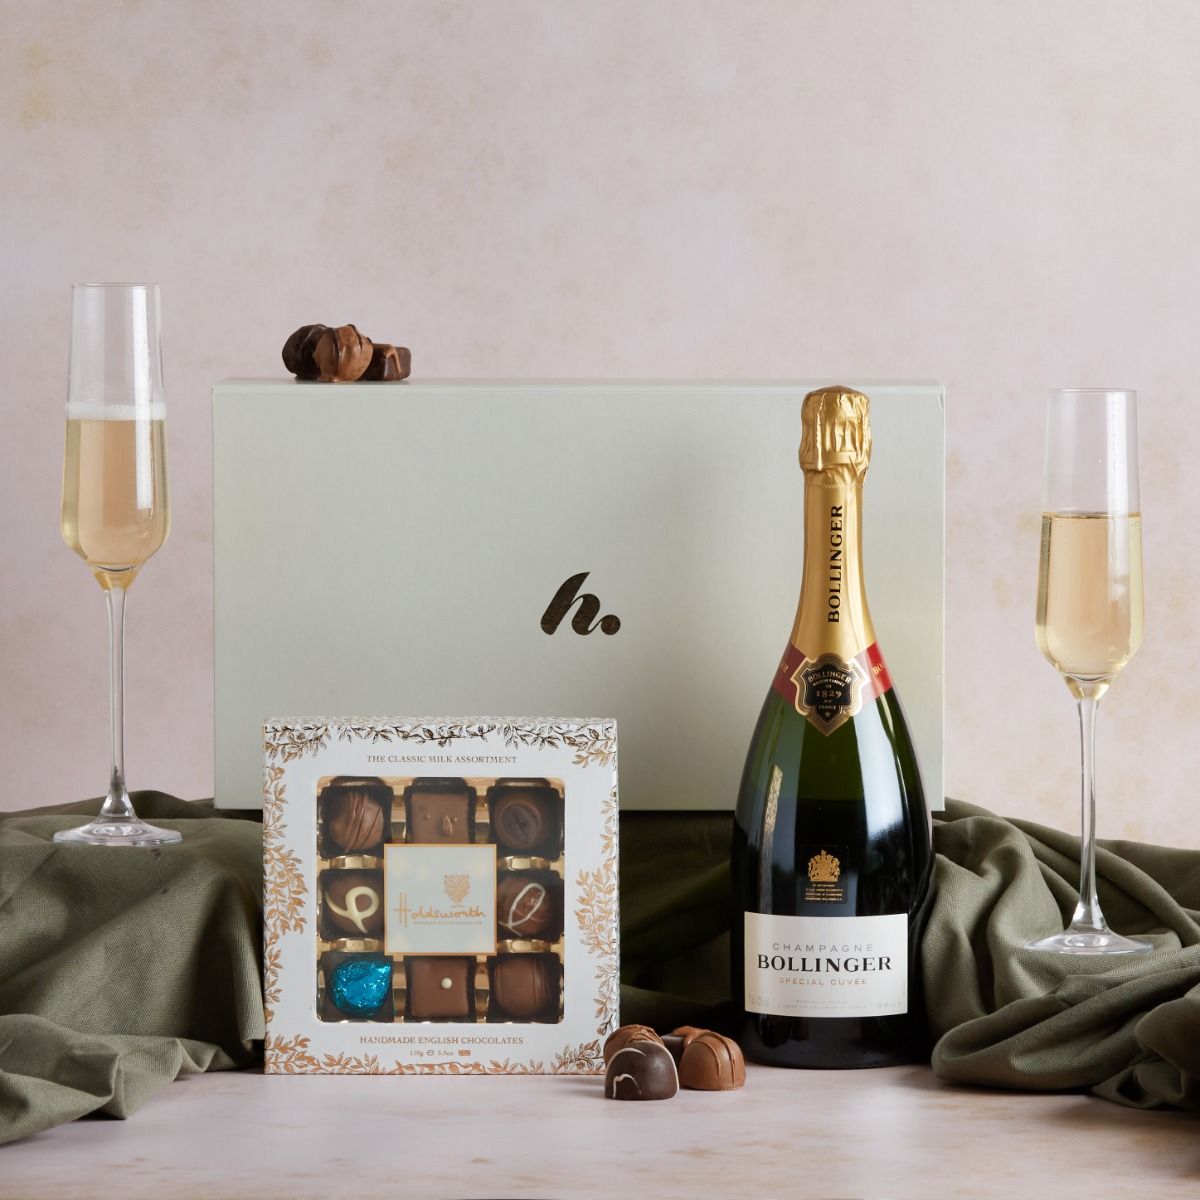 The Bollinger Champagne & Chocolates gift box with contents on display including flutes of Champagne